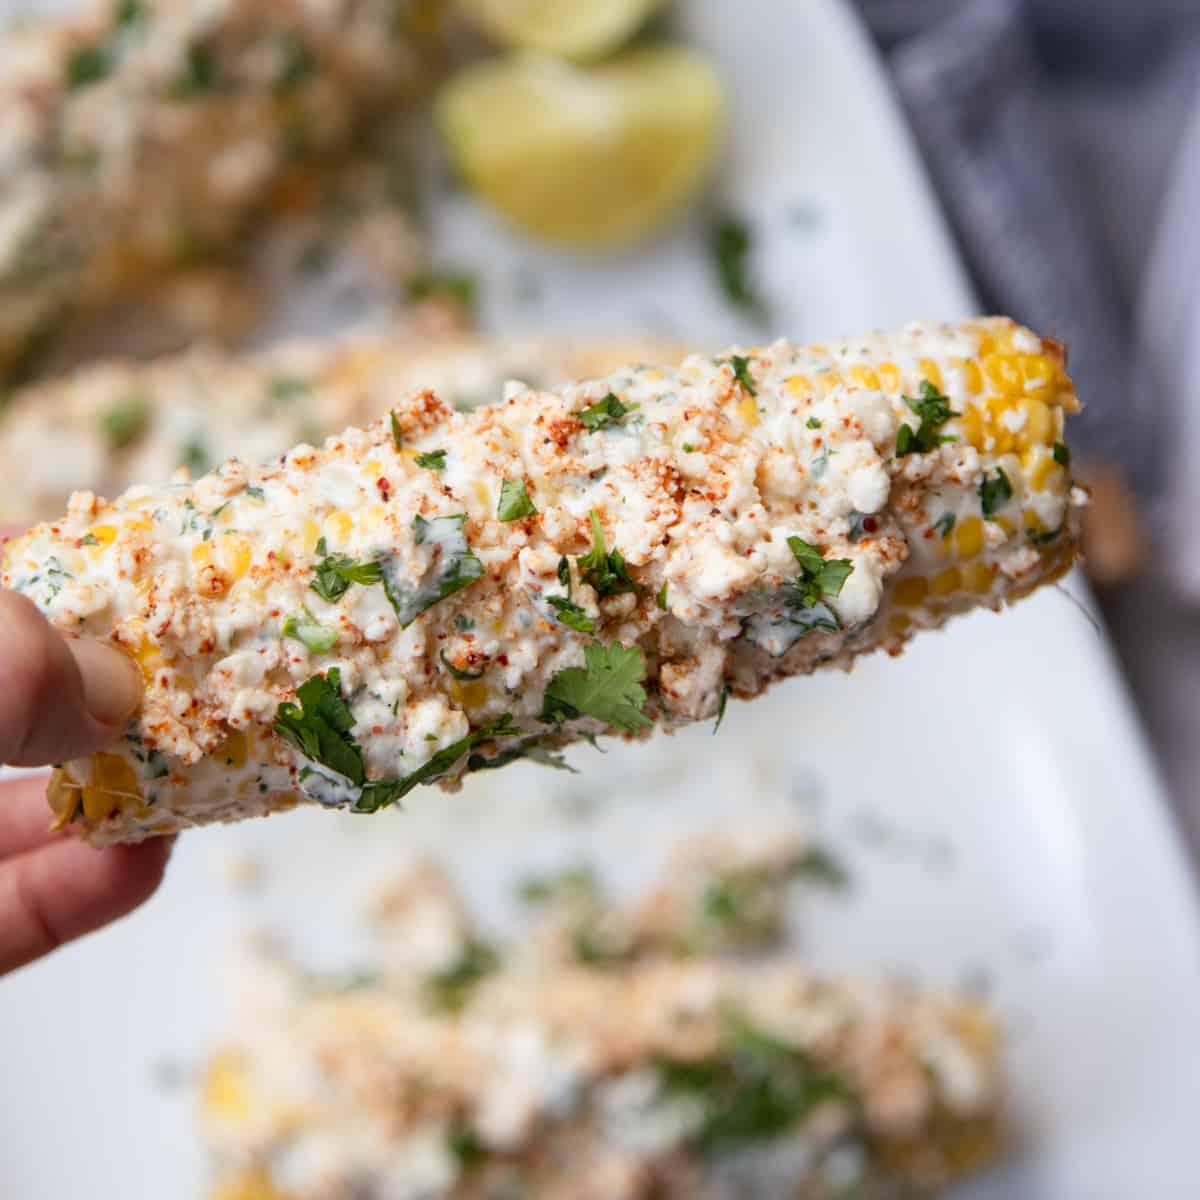 A hand holding an ear of Mexican street corn topped with cilantro.